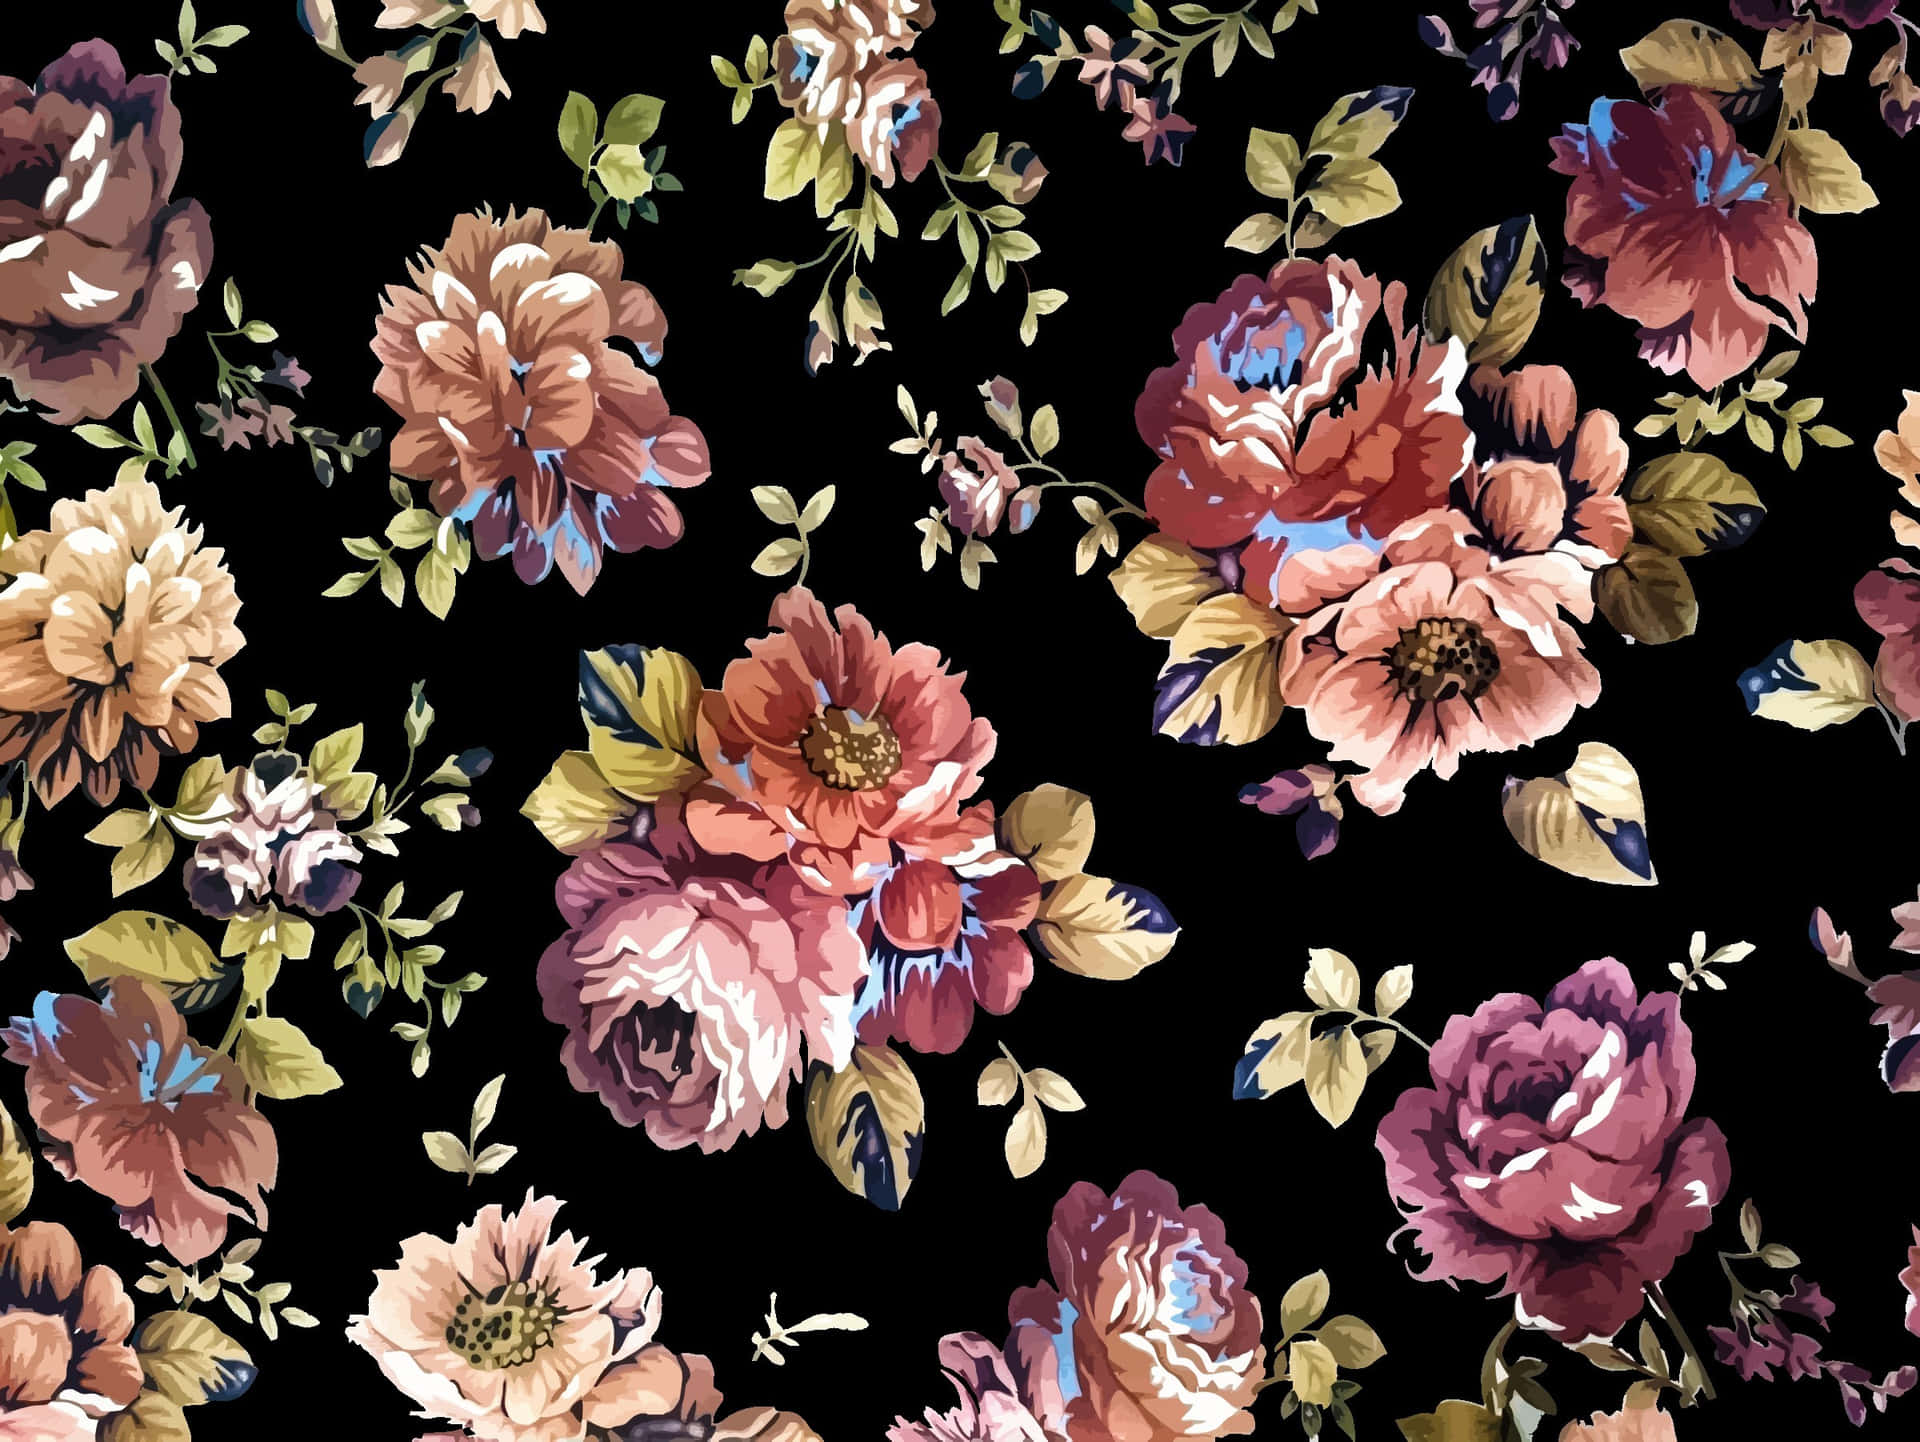 "Bringing the beauty of nature indoors with this vintage flower background."